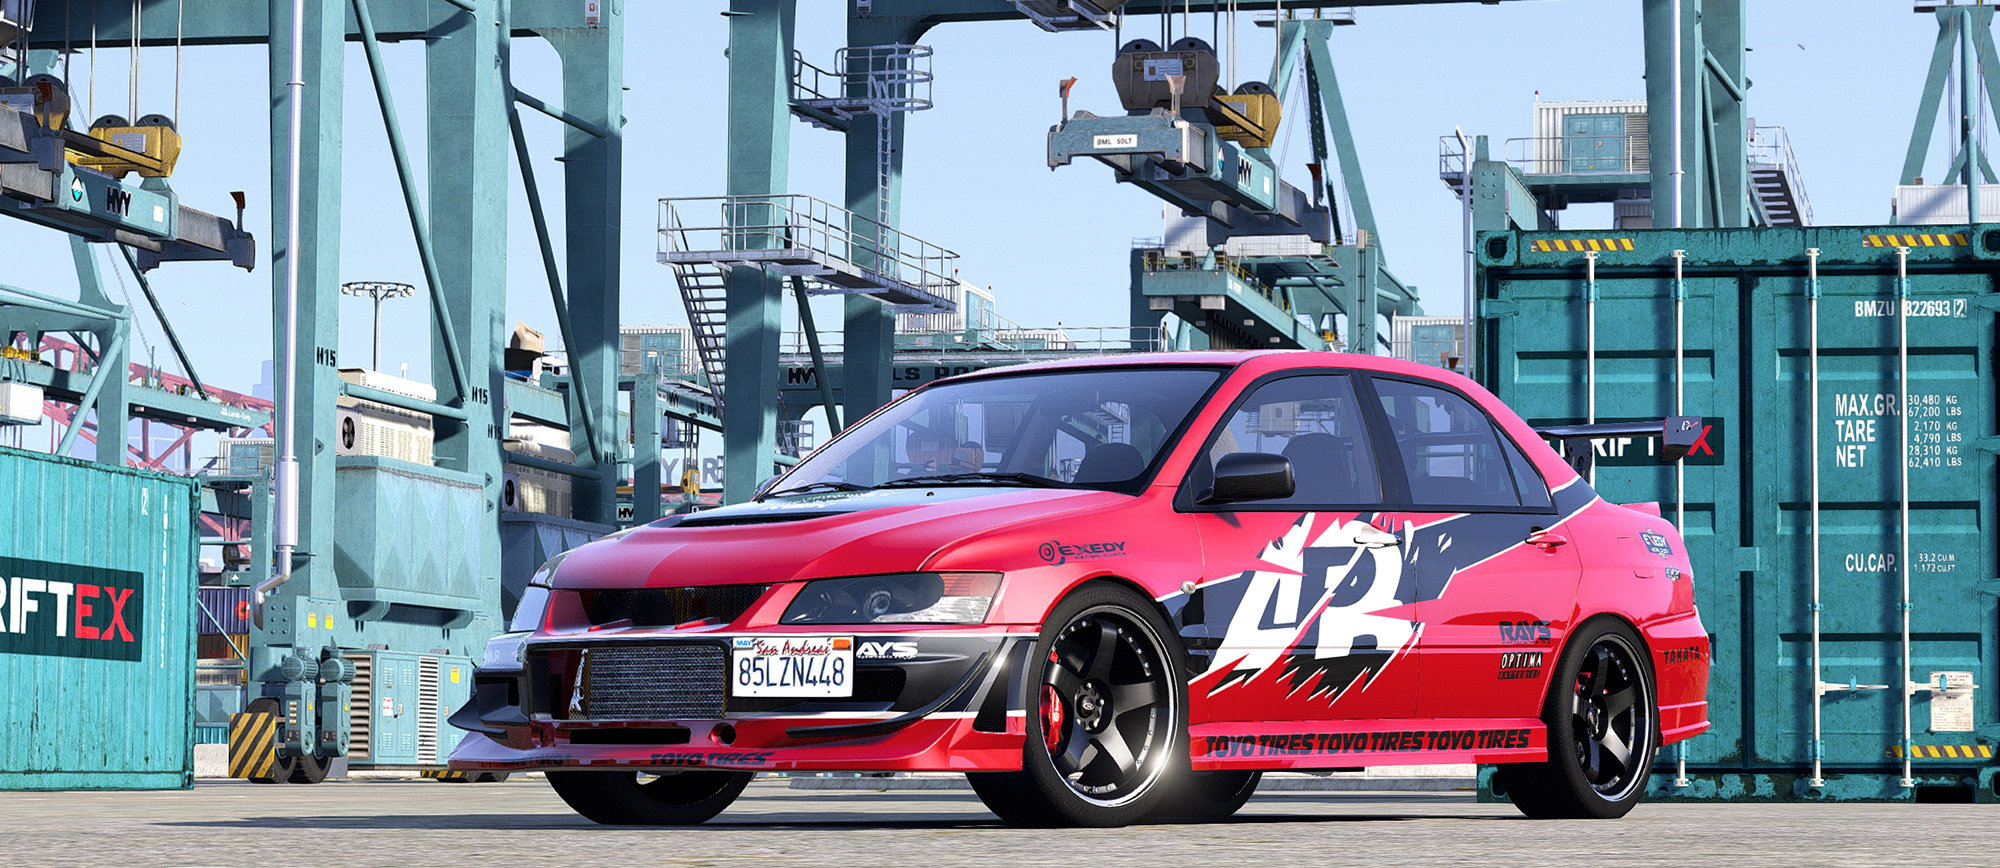 mitsubishi lancer evolution the fast and the furious tokyo drift gta5 mods com fast and the furious tokyo drift